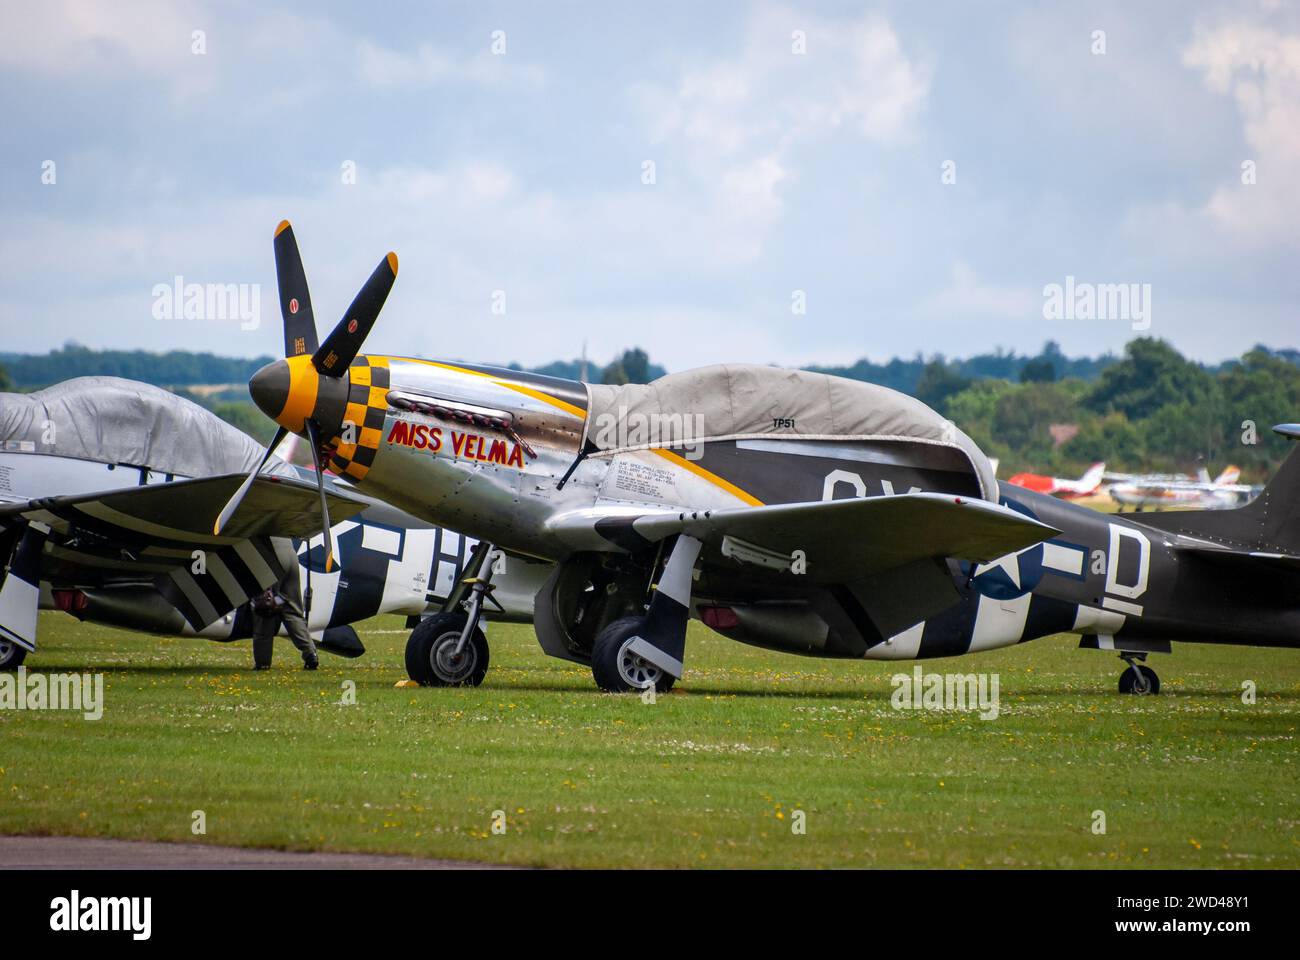 P51 Mustang fighter planes from WW2 USAF sat on an airfield Stock Photo